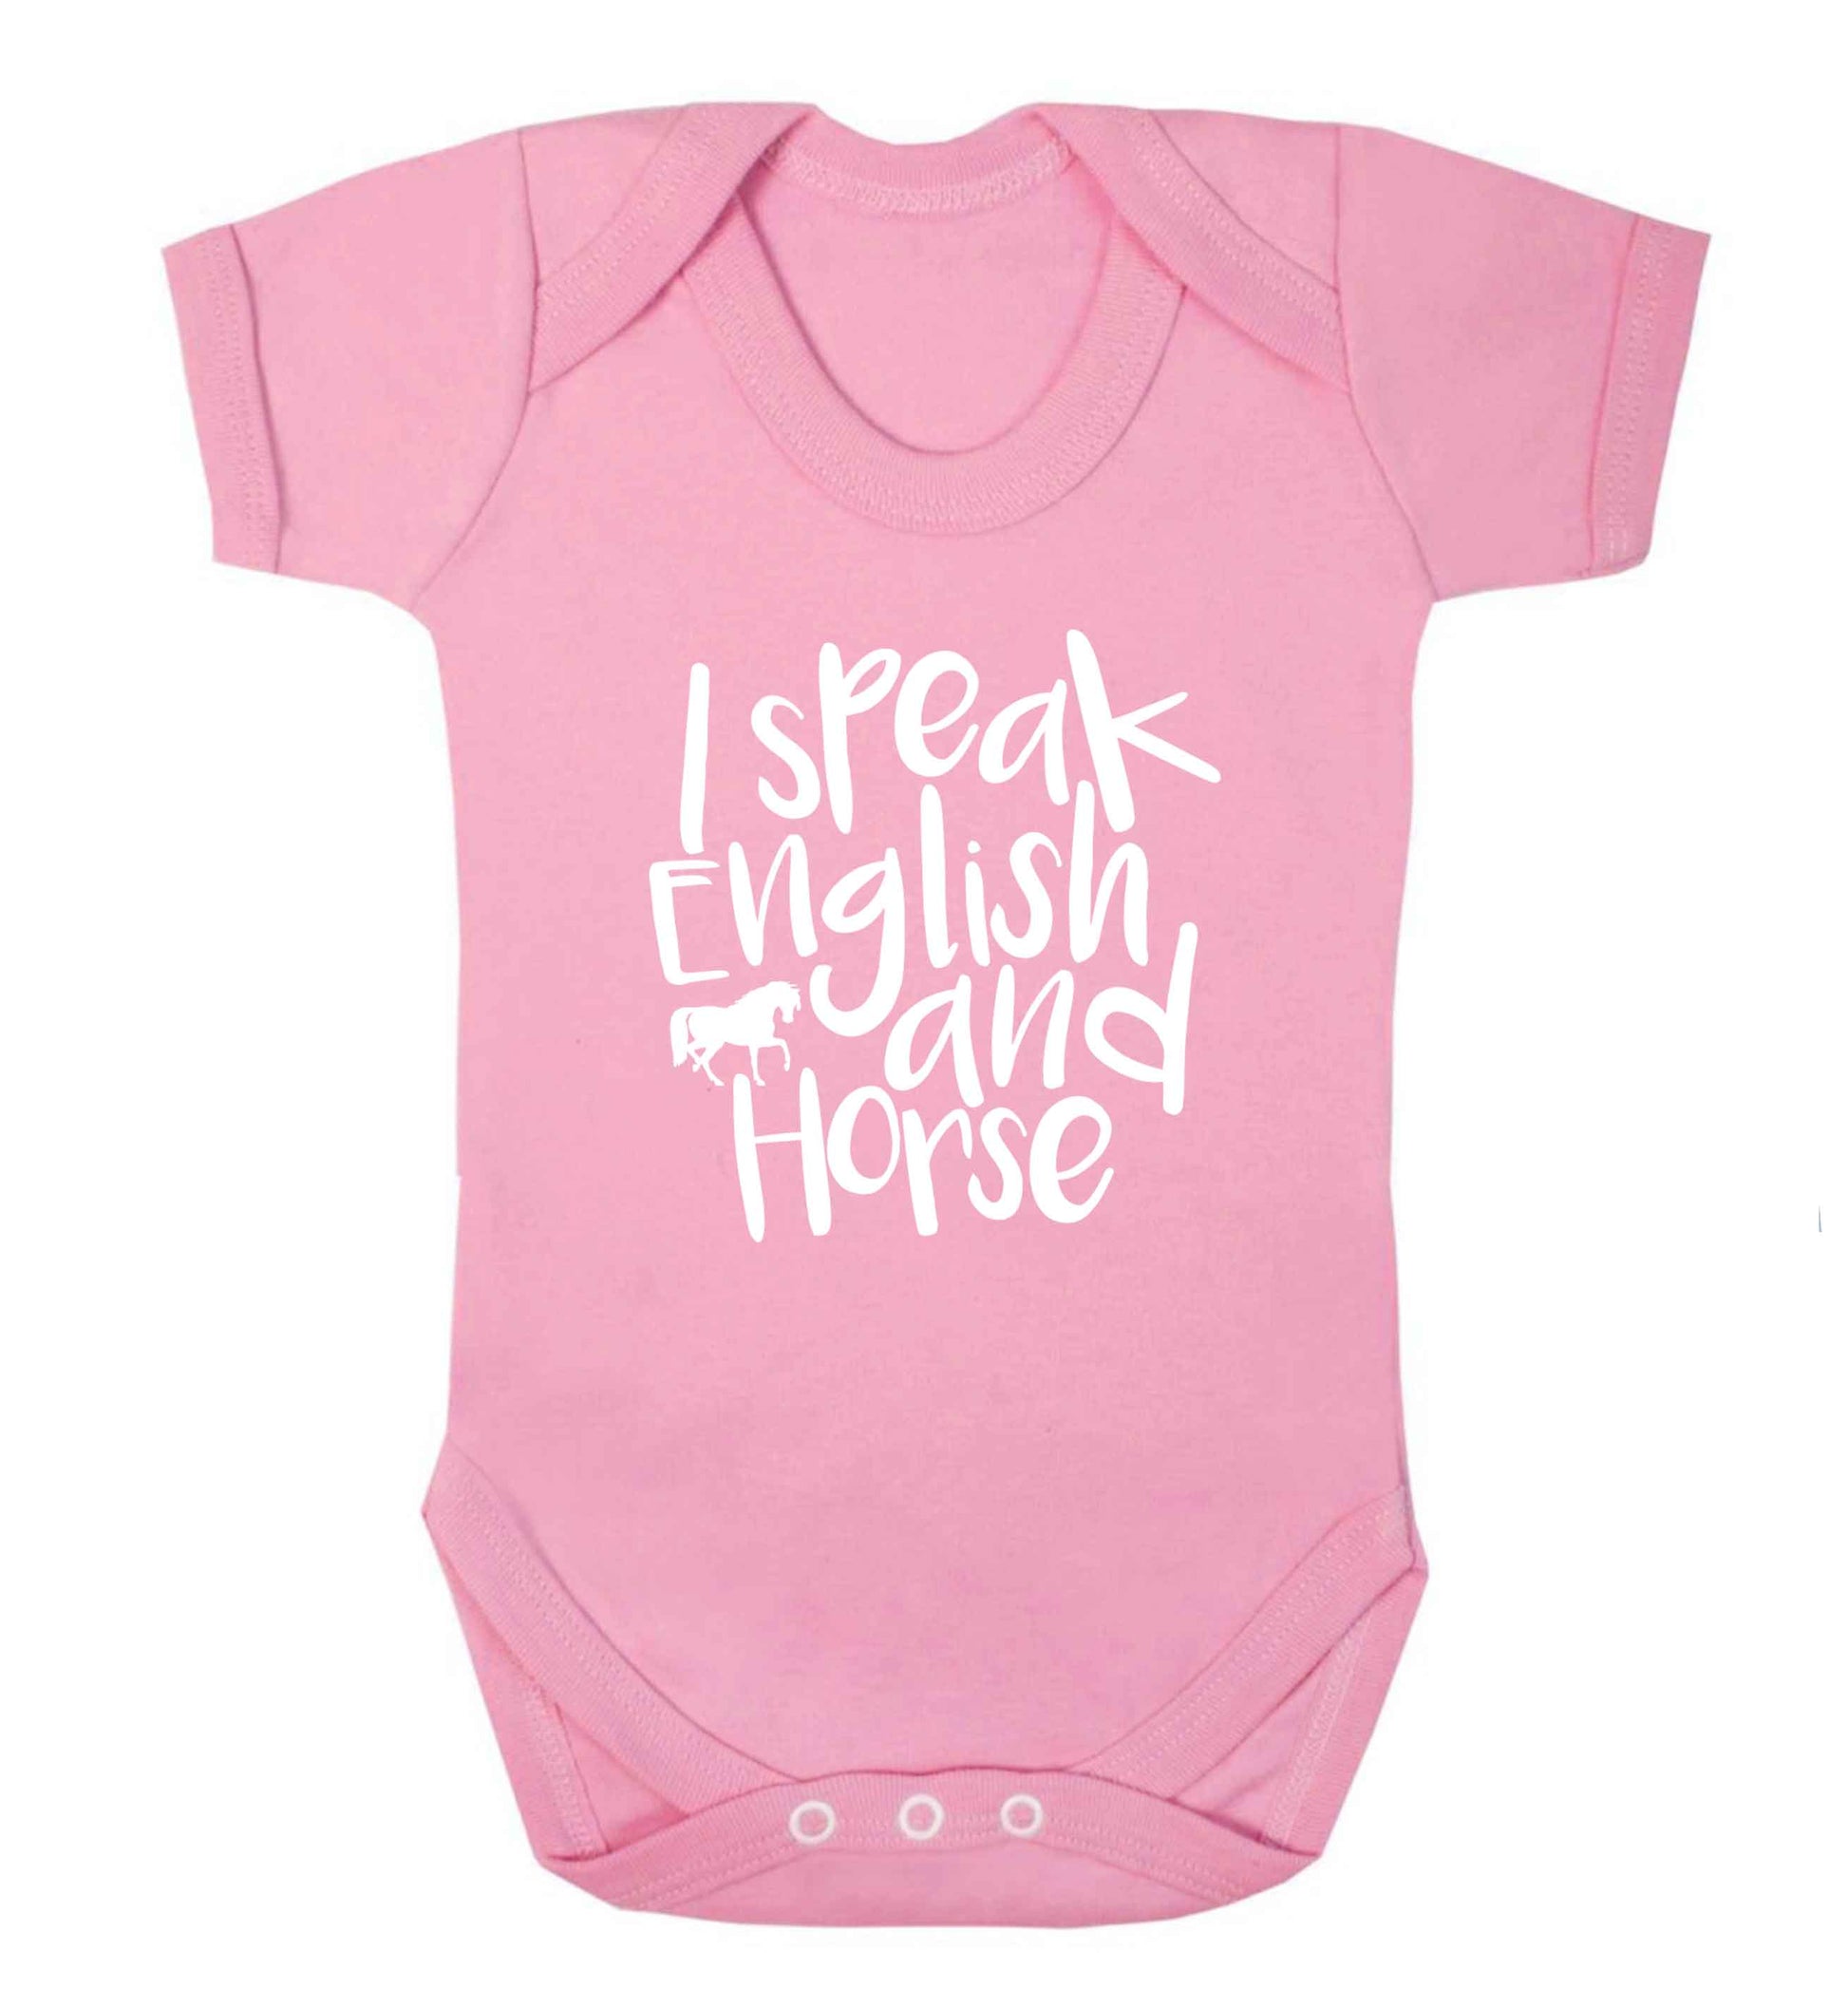 I speak English and horse baby vest pale pink 18-24 months